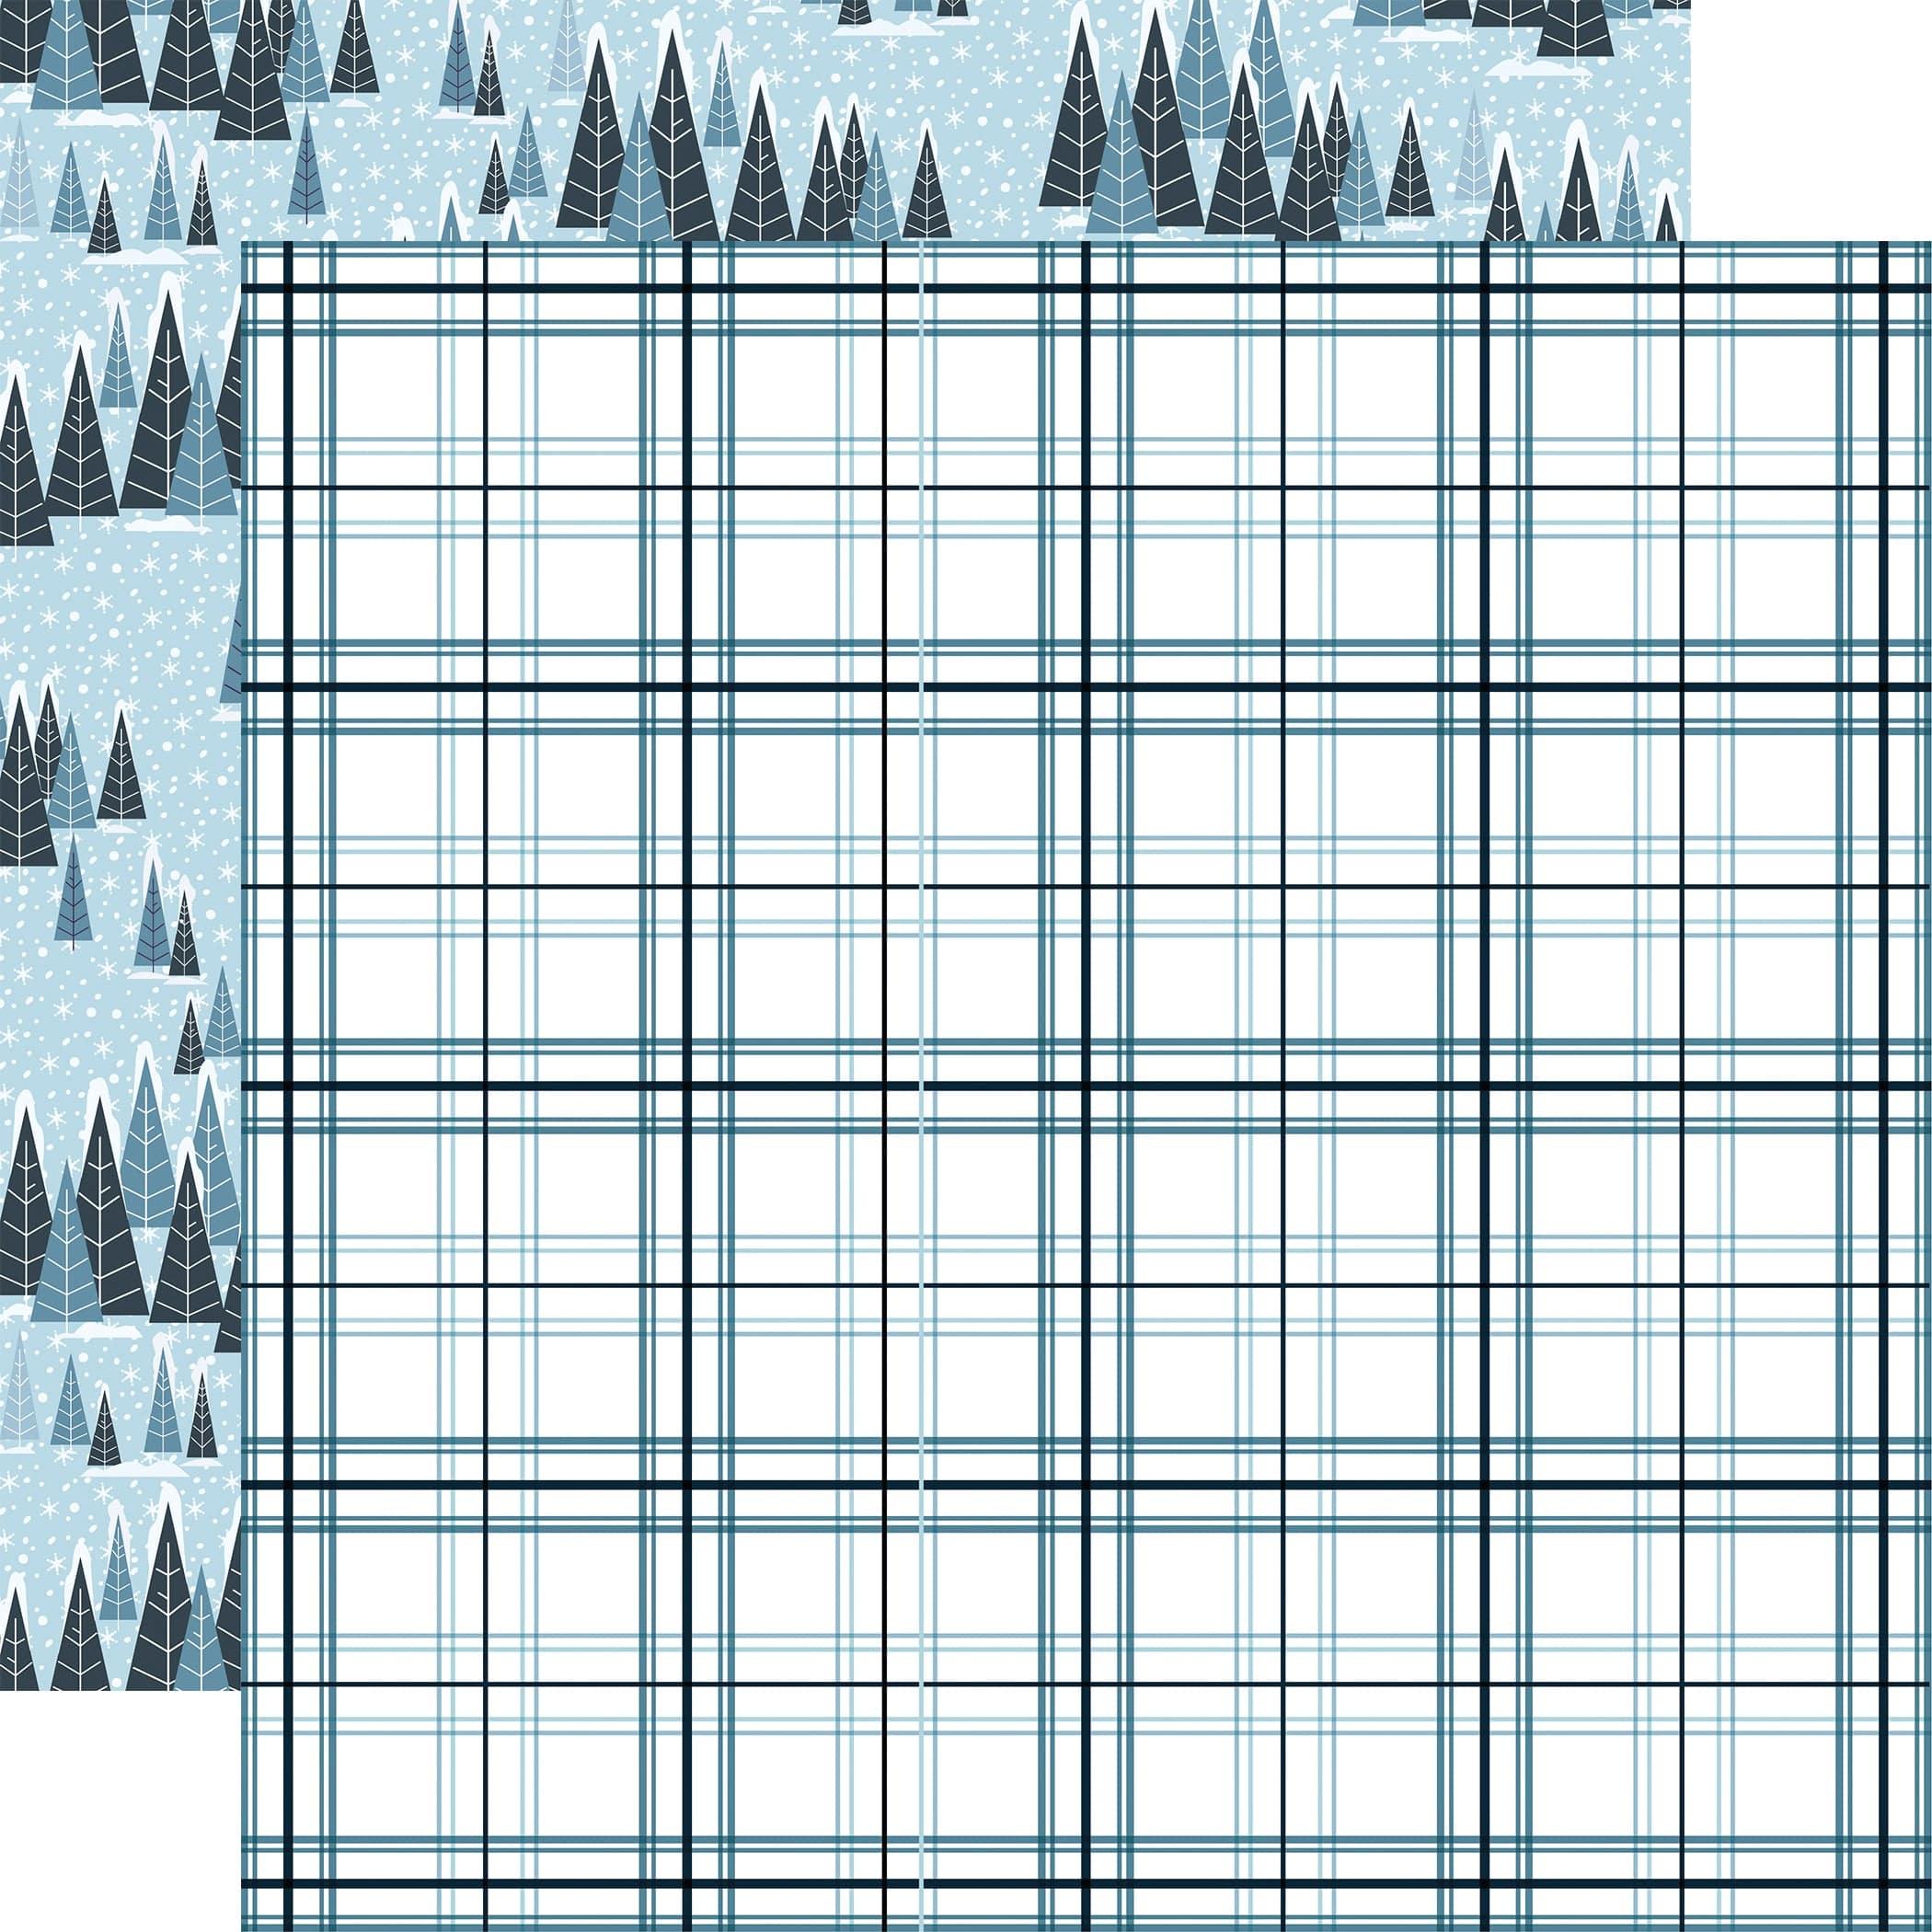 The Magic of Winter Collection Cold Plaid 12 x 12 Double-Sided Scrapbook Paper by Echo Park Paper - Scrapbook Supply Companies